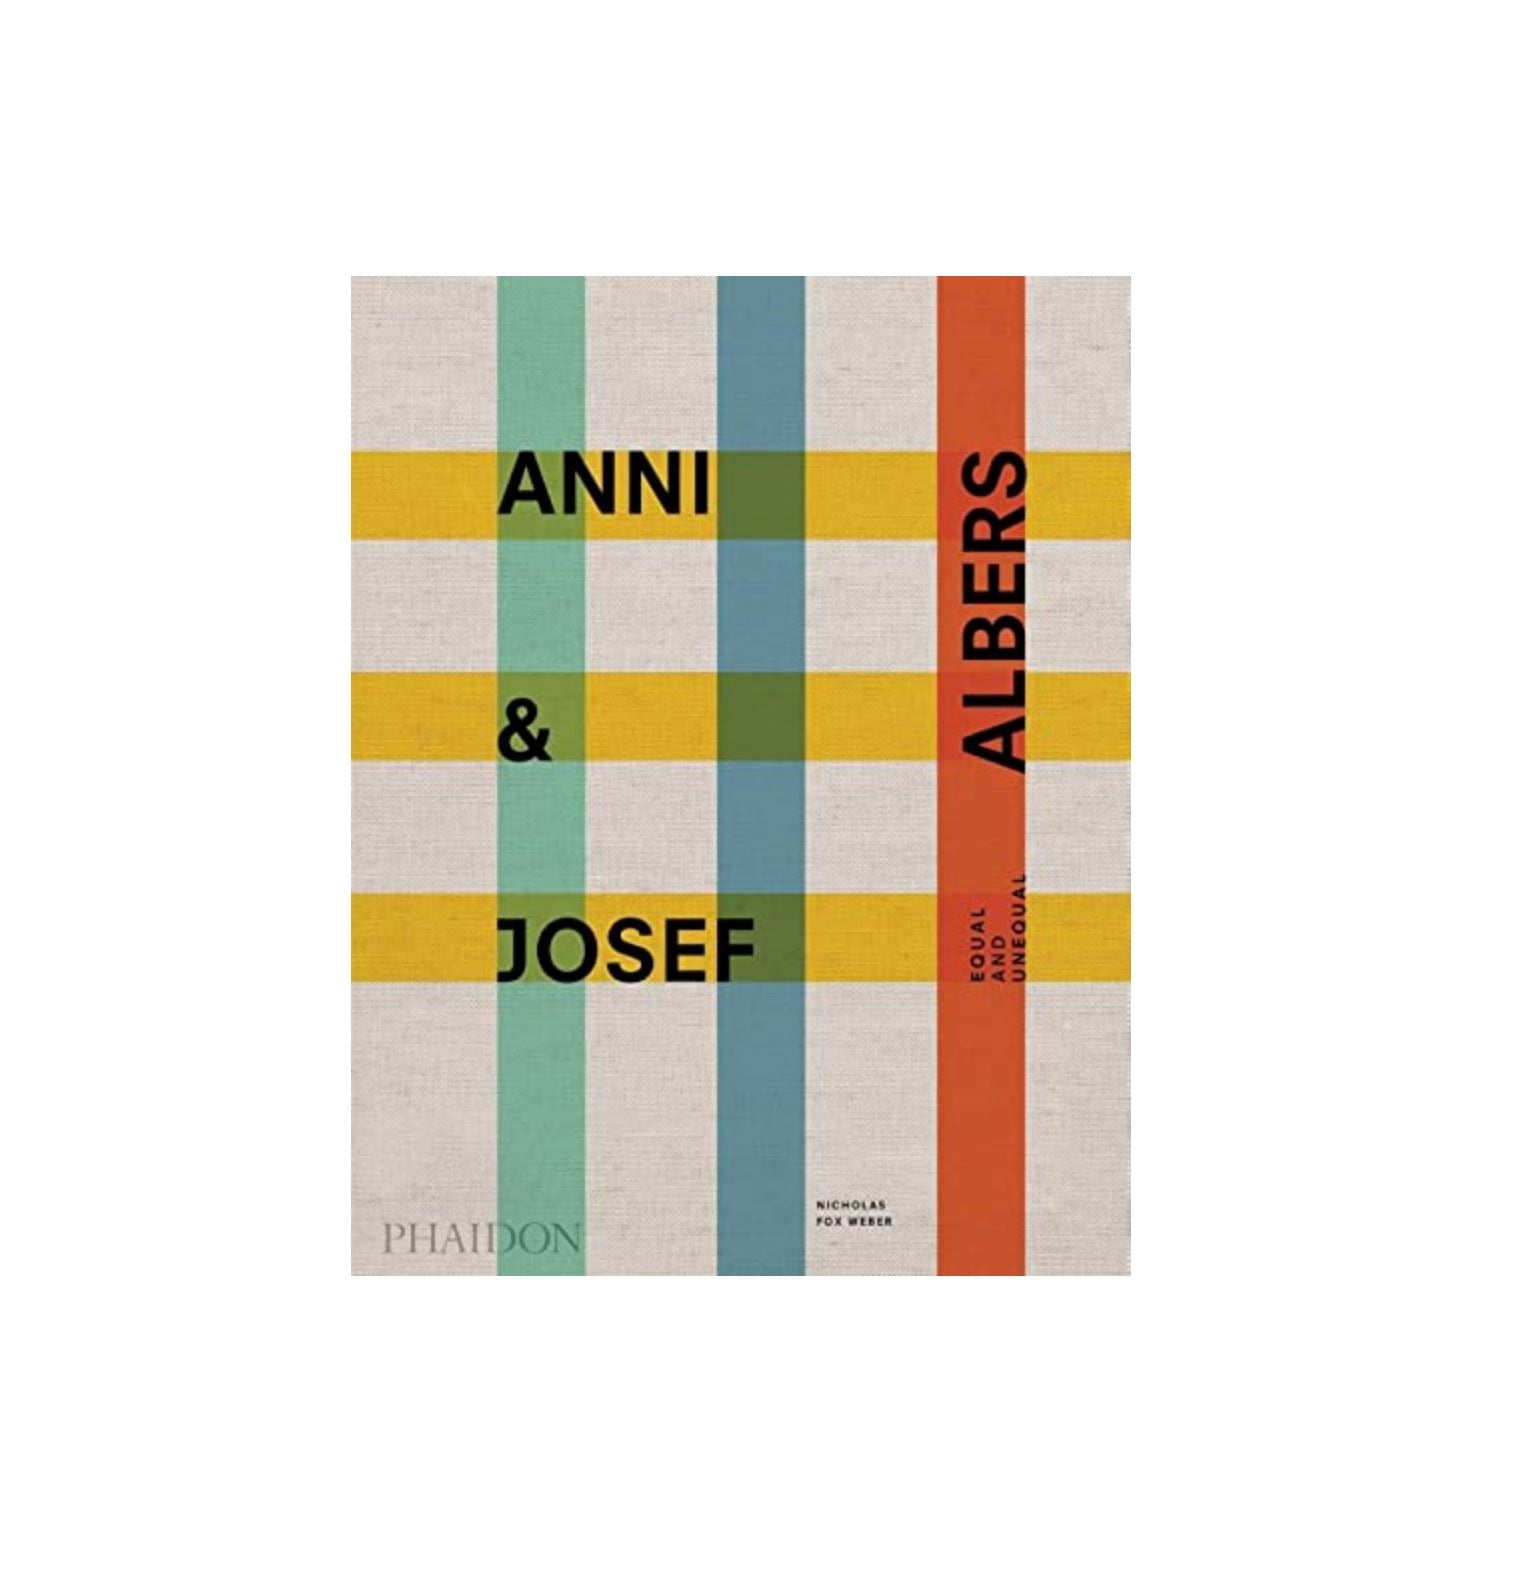 Anni and Josef Albers Equal and Unequal book by Nicholas Fox Weber - Third Drawer Down